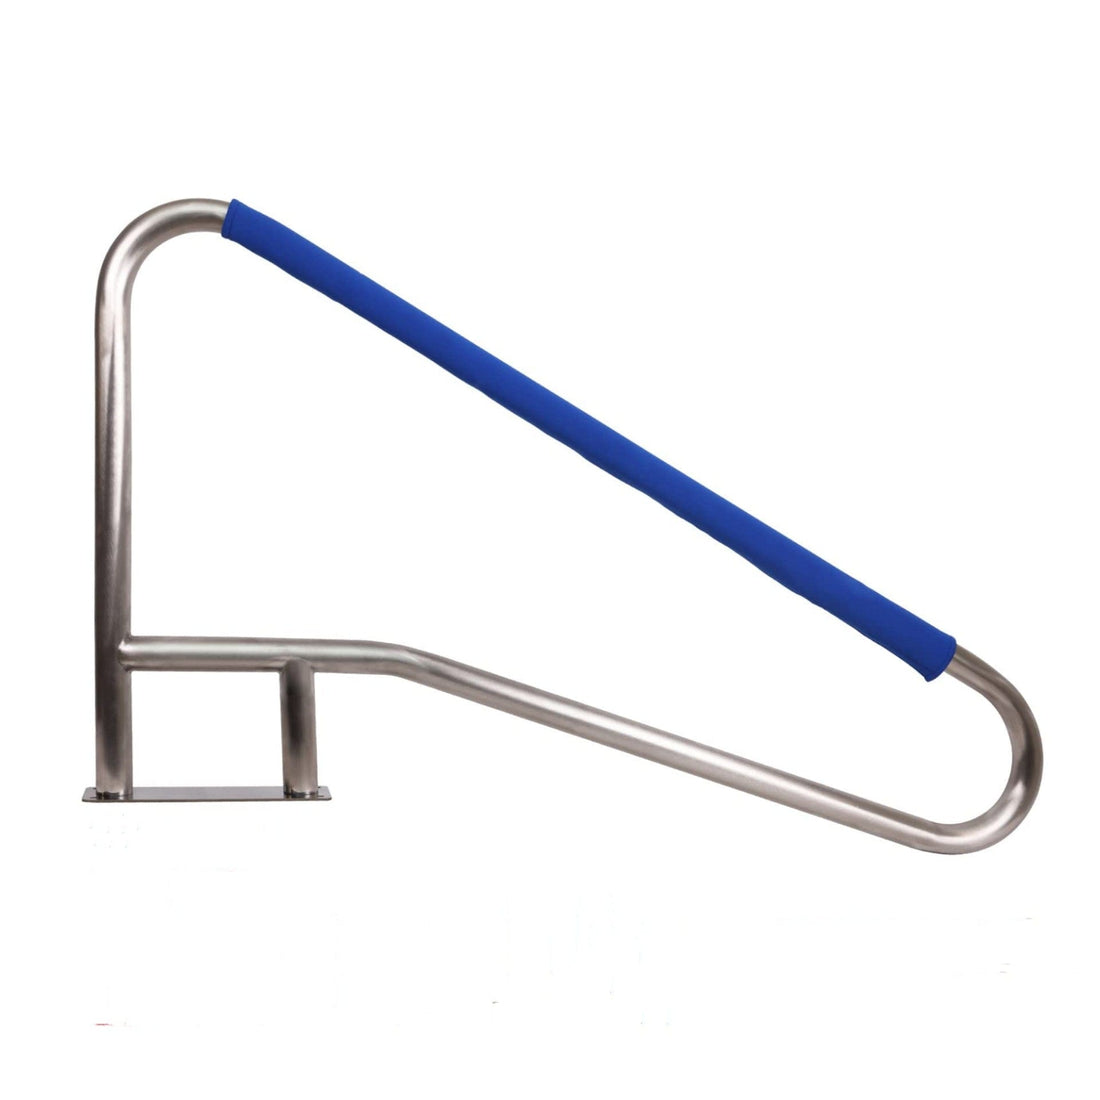 55x32 Inch Pool Handrail 250LBS Load for Inground Pool